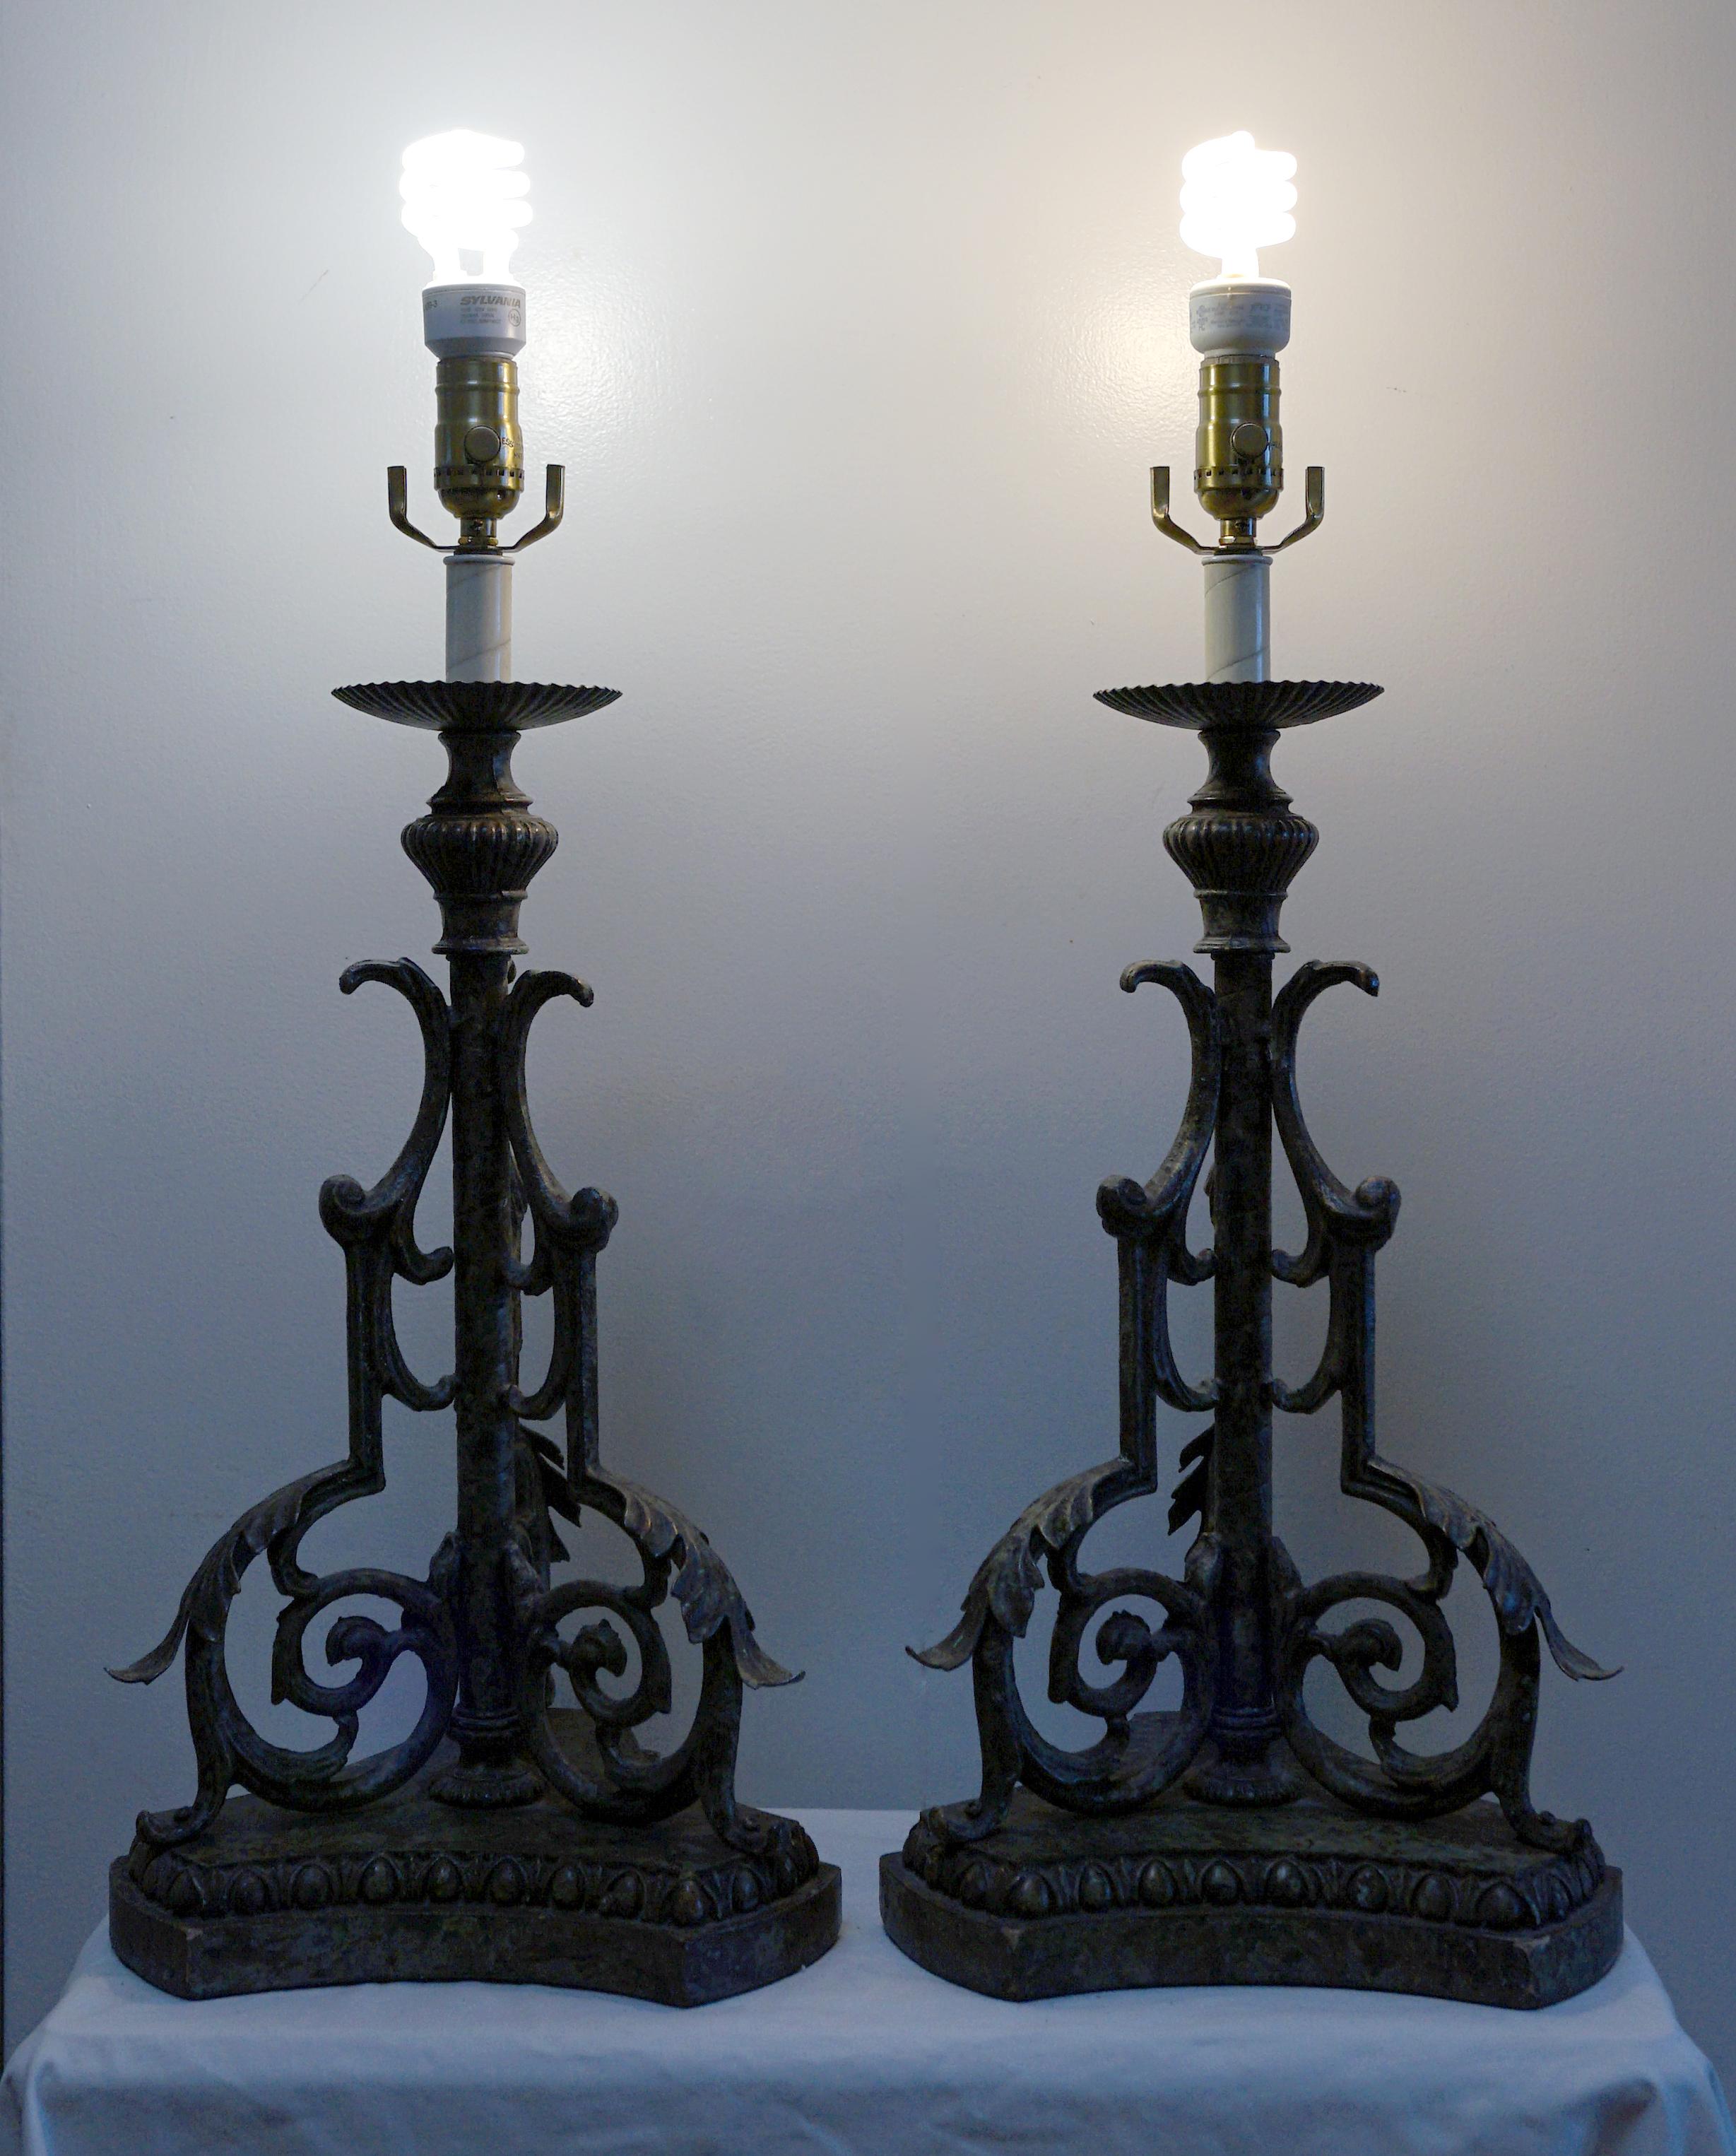 Pair of 19th Century European Pricket Conversion Gothic Table Lamps For Sale 1